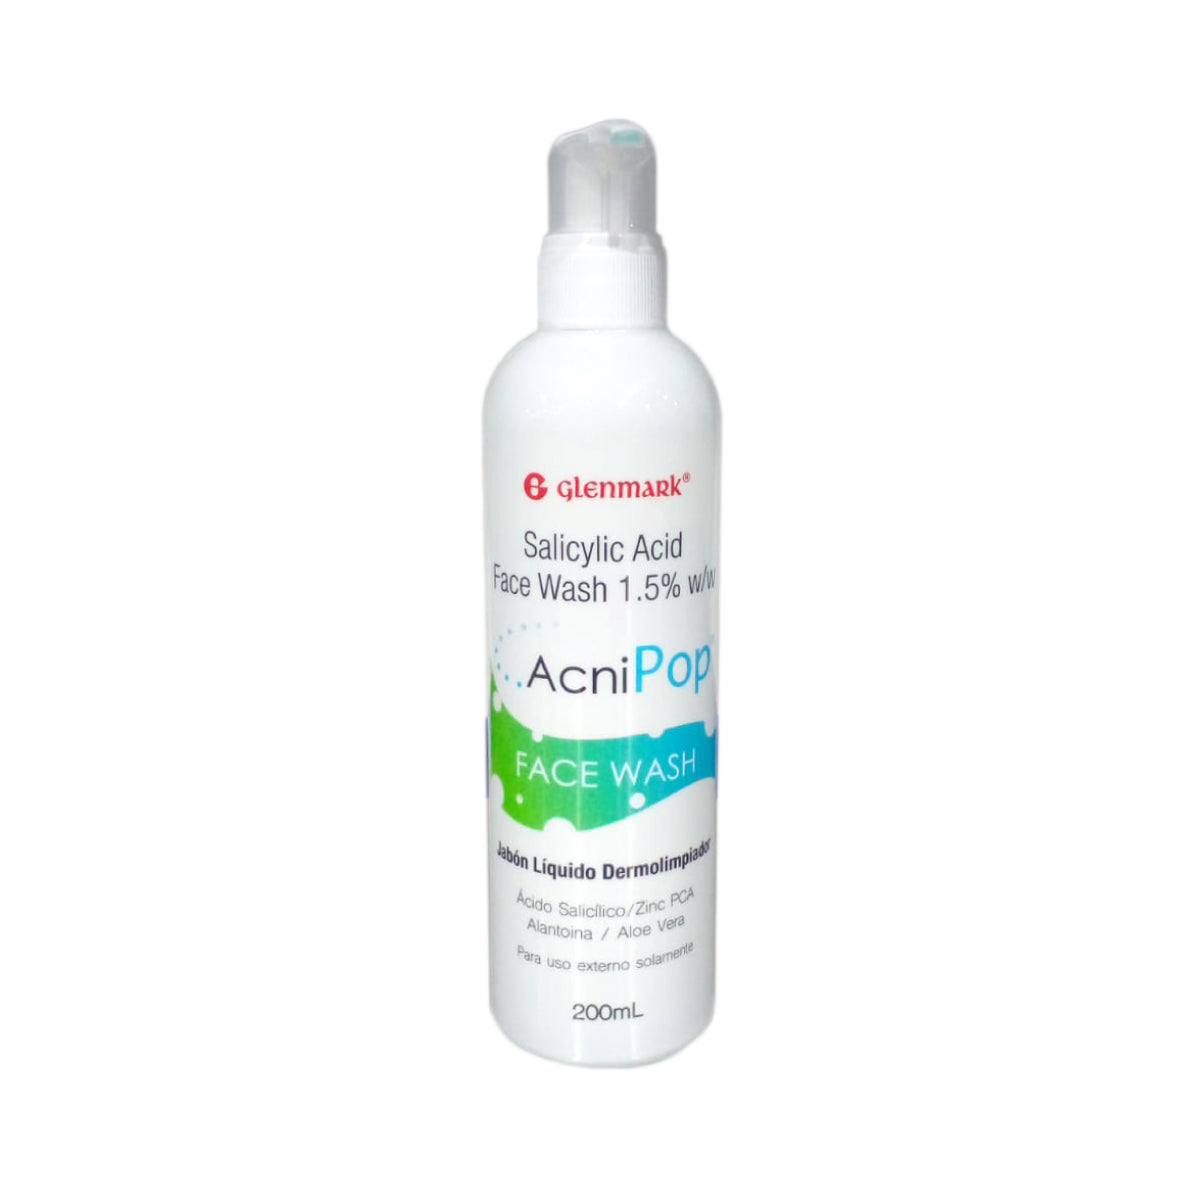 Acnipop face wash 200ml.